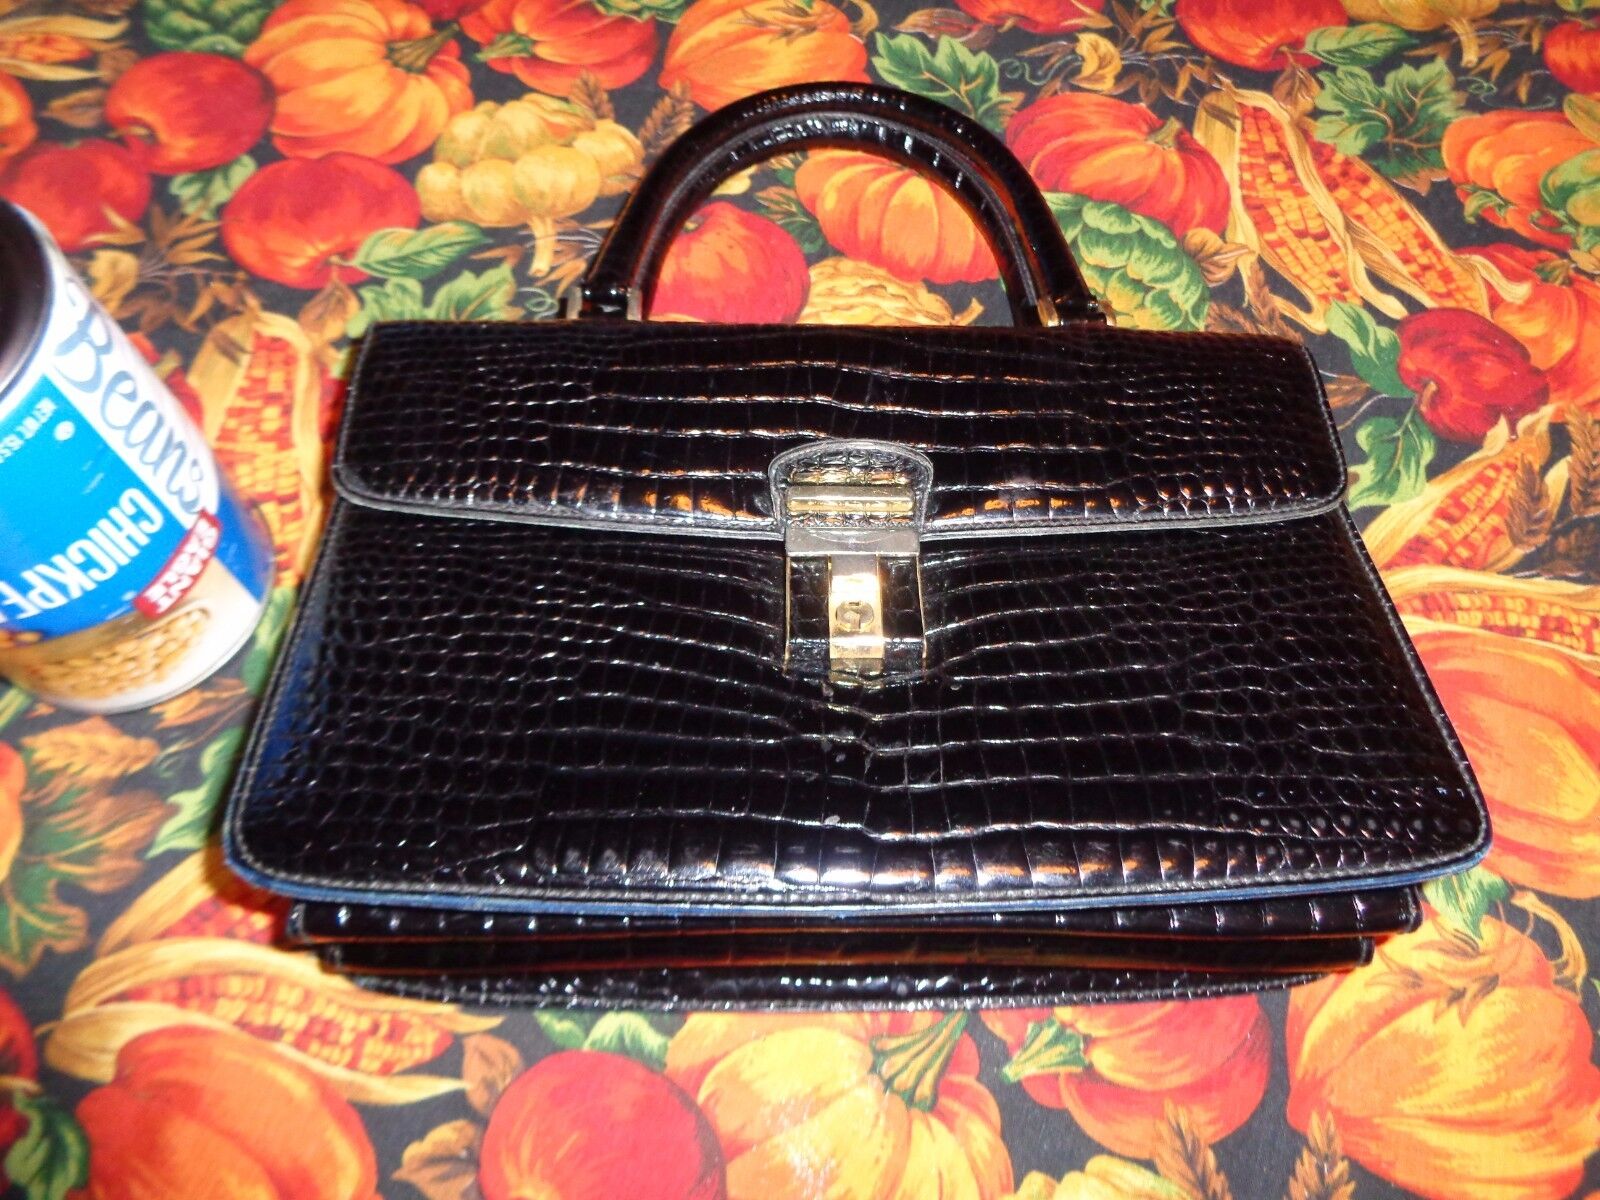 VINTAGE COBLENTZ SYNTHETIC ALLIGATOR AND LEATHER HANDBAG PREOWNED / USED 